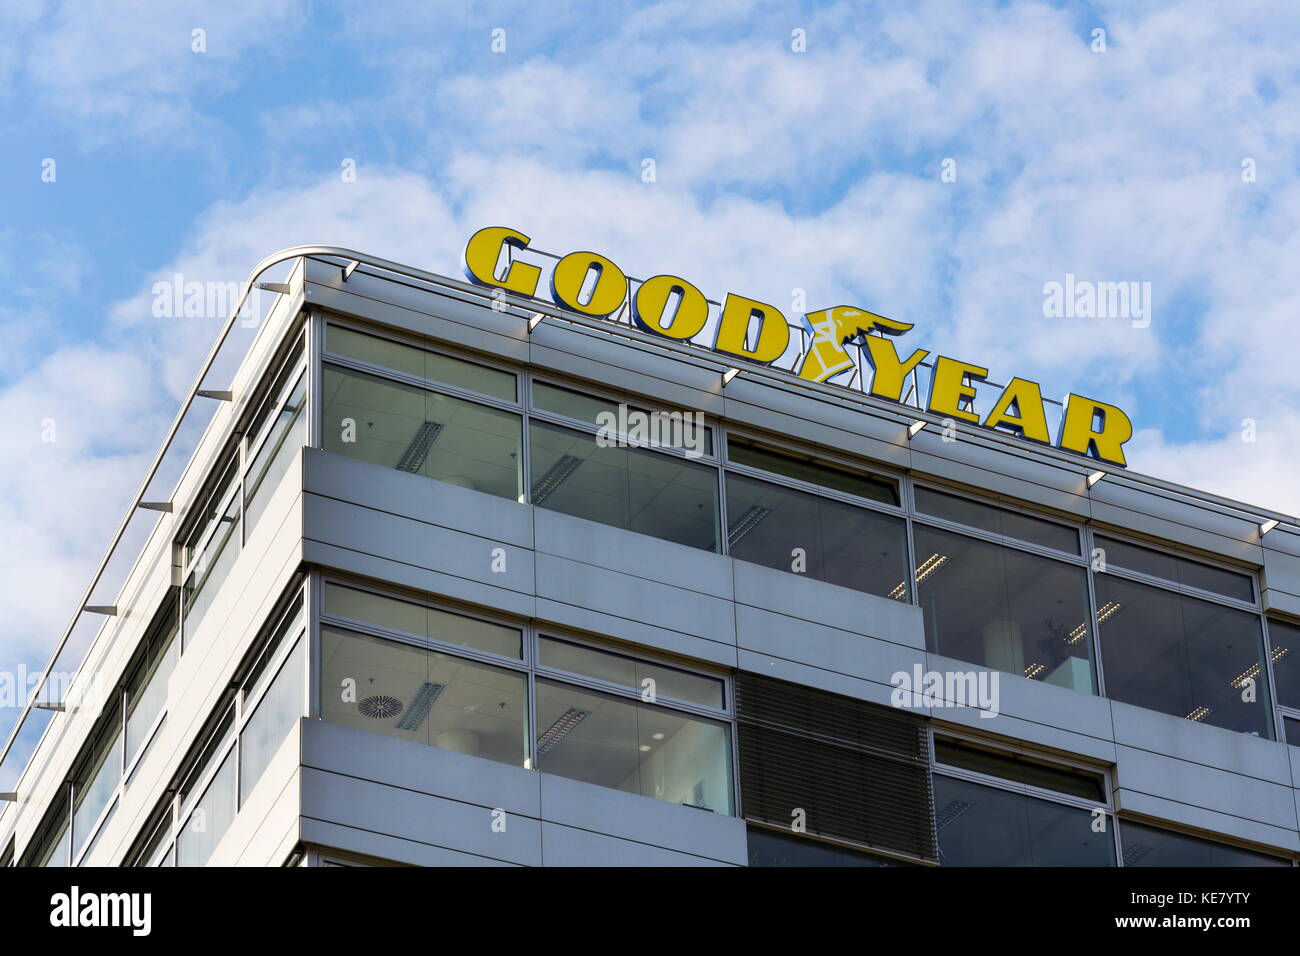 PRAGUE, CZECH REPUBLIC - OCTOBER 14: The Goodyear Tire and Rubber Company logo on headquarters  building on October 14, 2017 in Prague, Czech republic Stock Photo